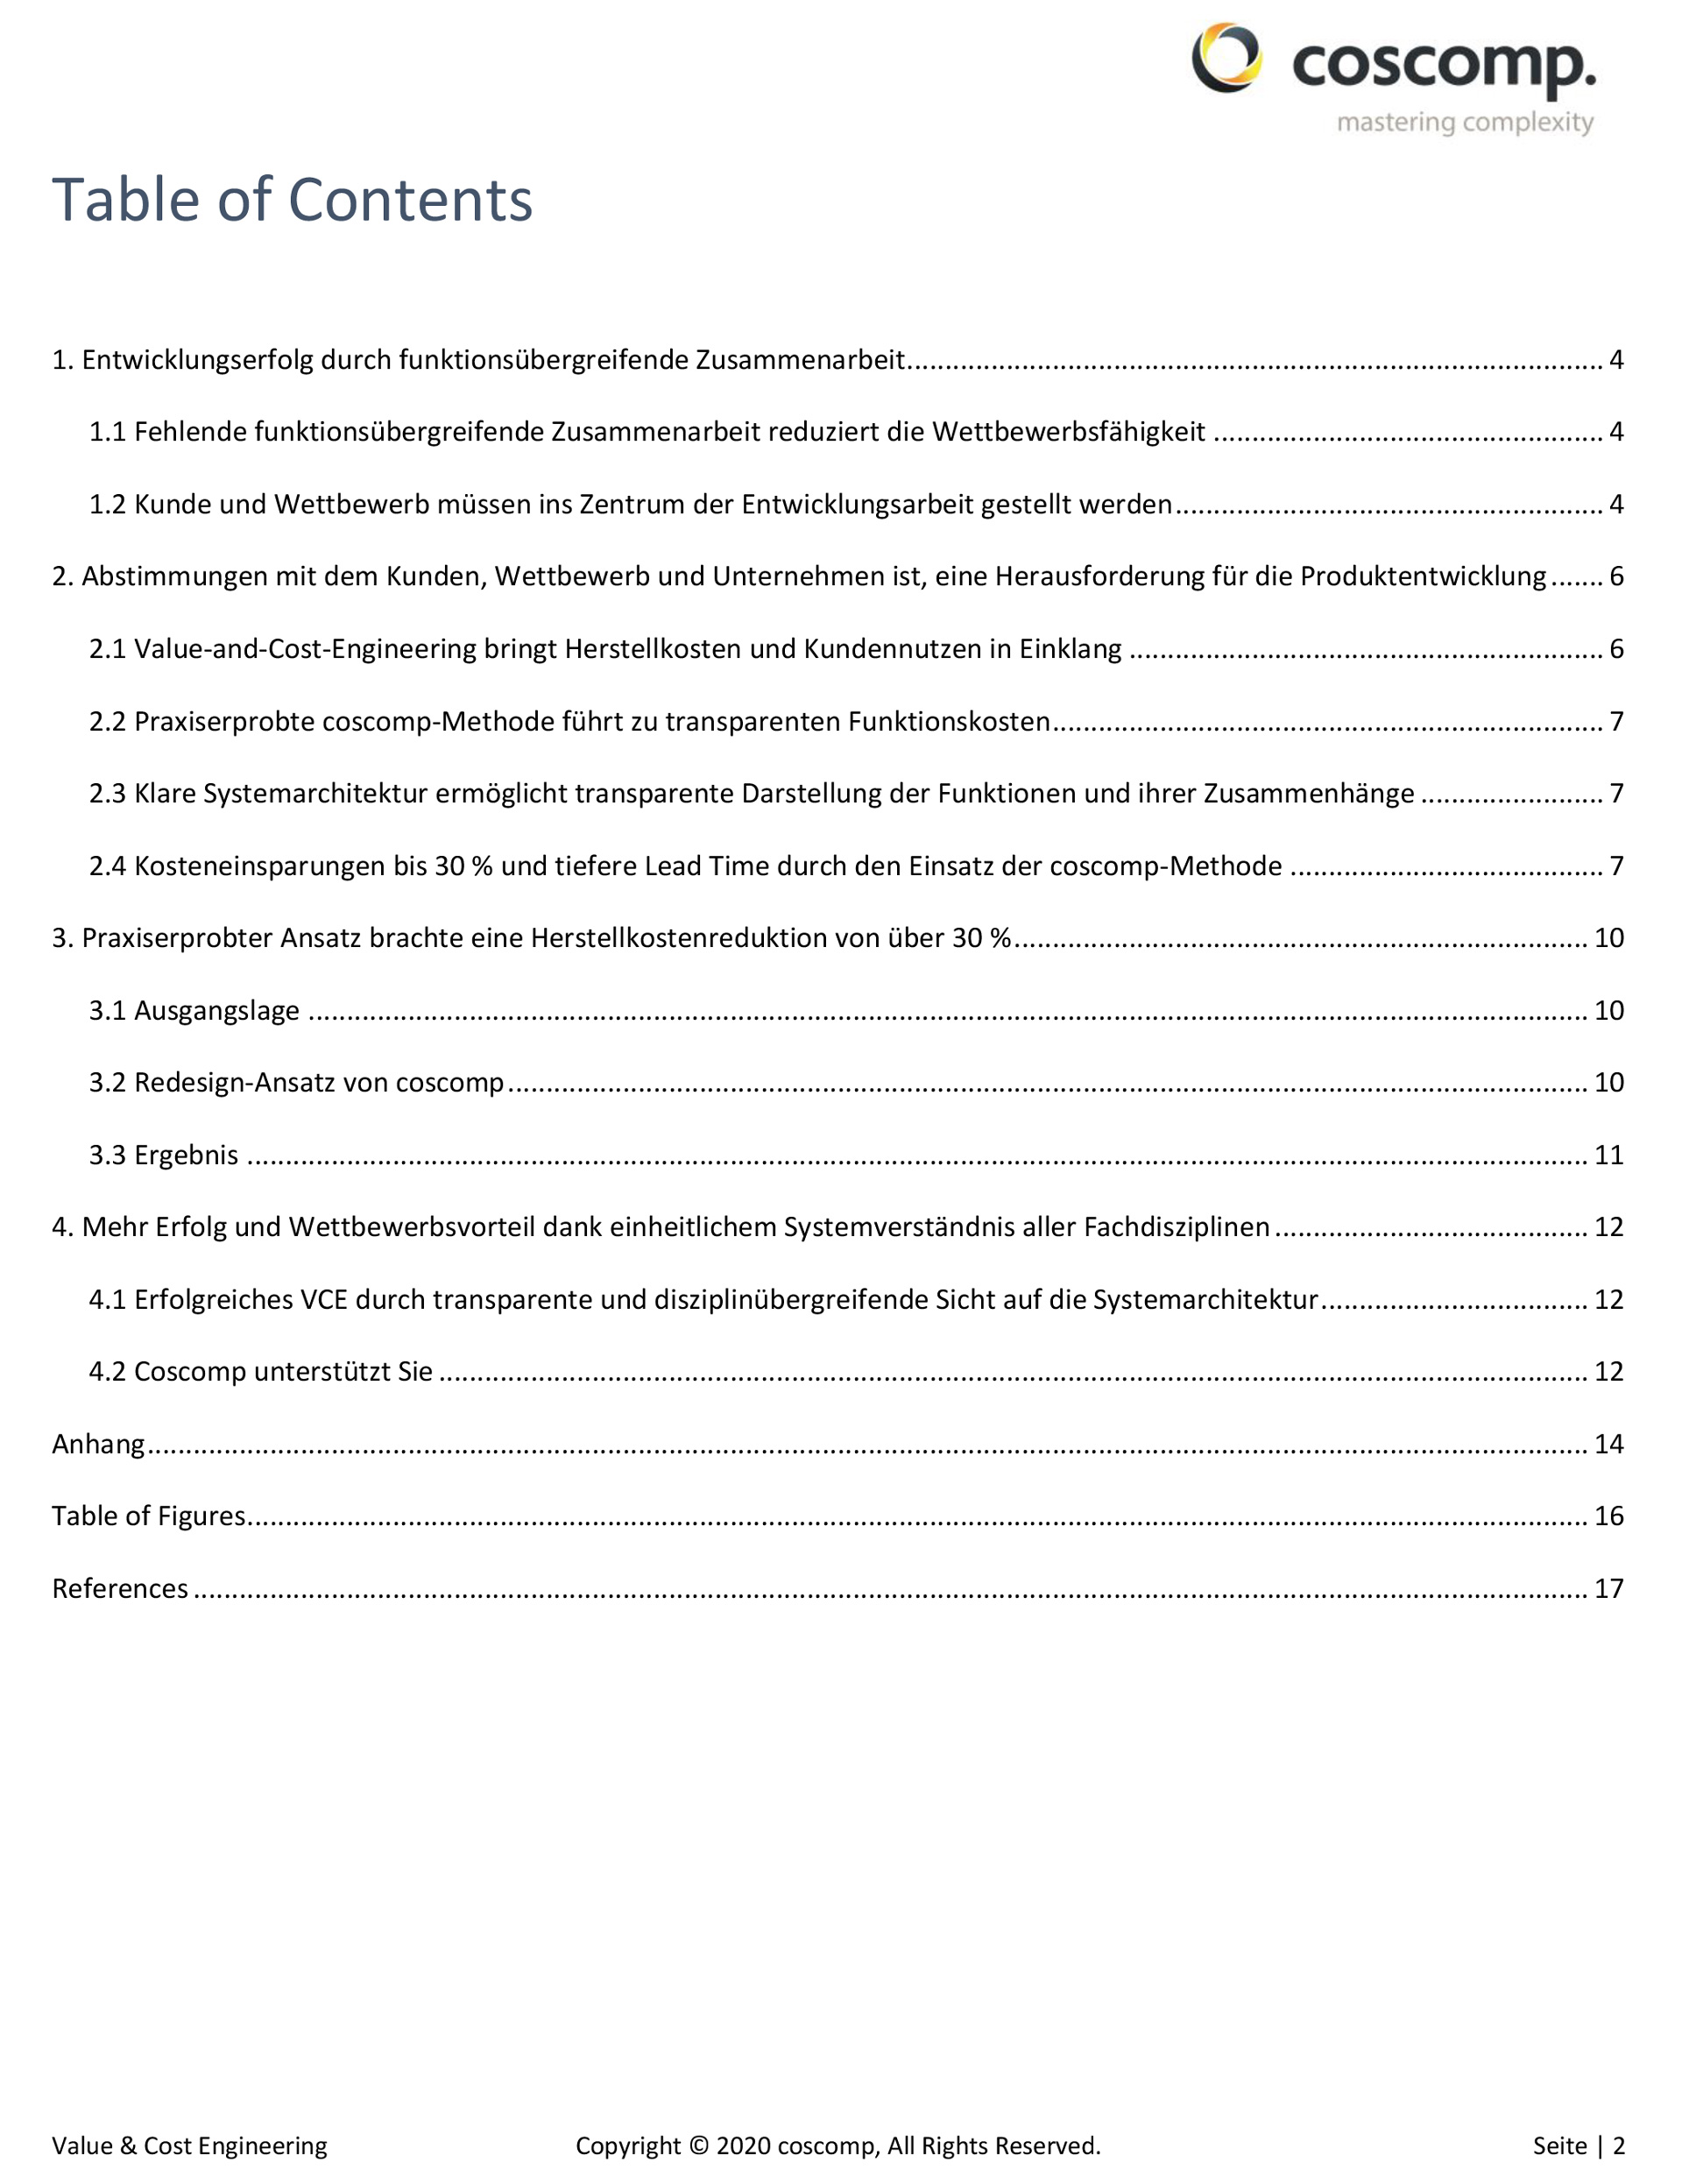 White Paper Value And Cost Engineering Coscomp 2